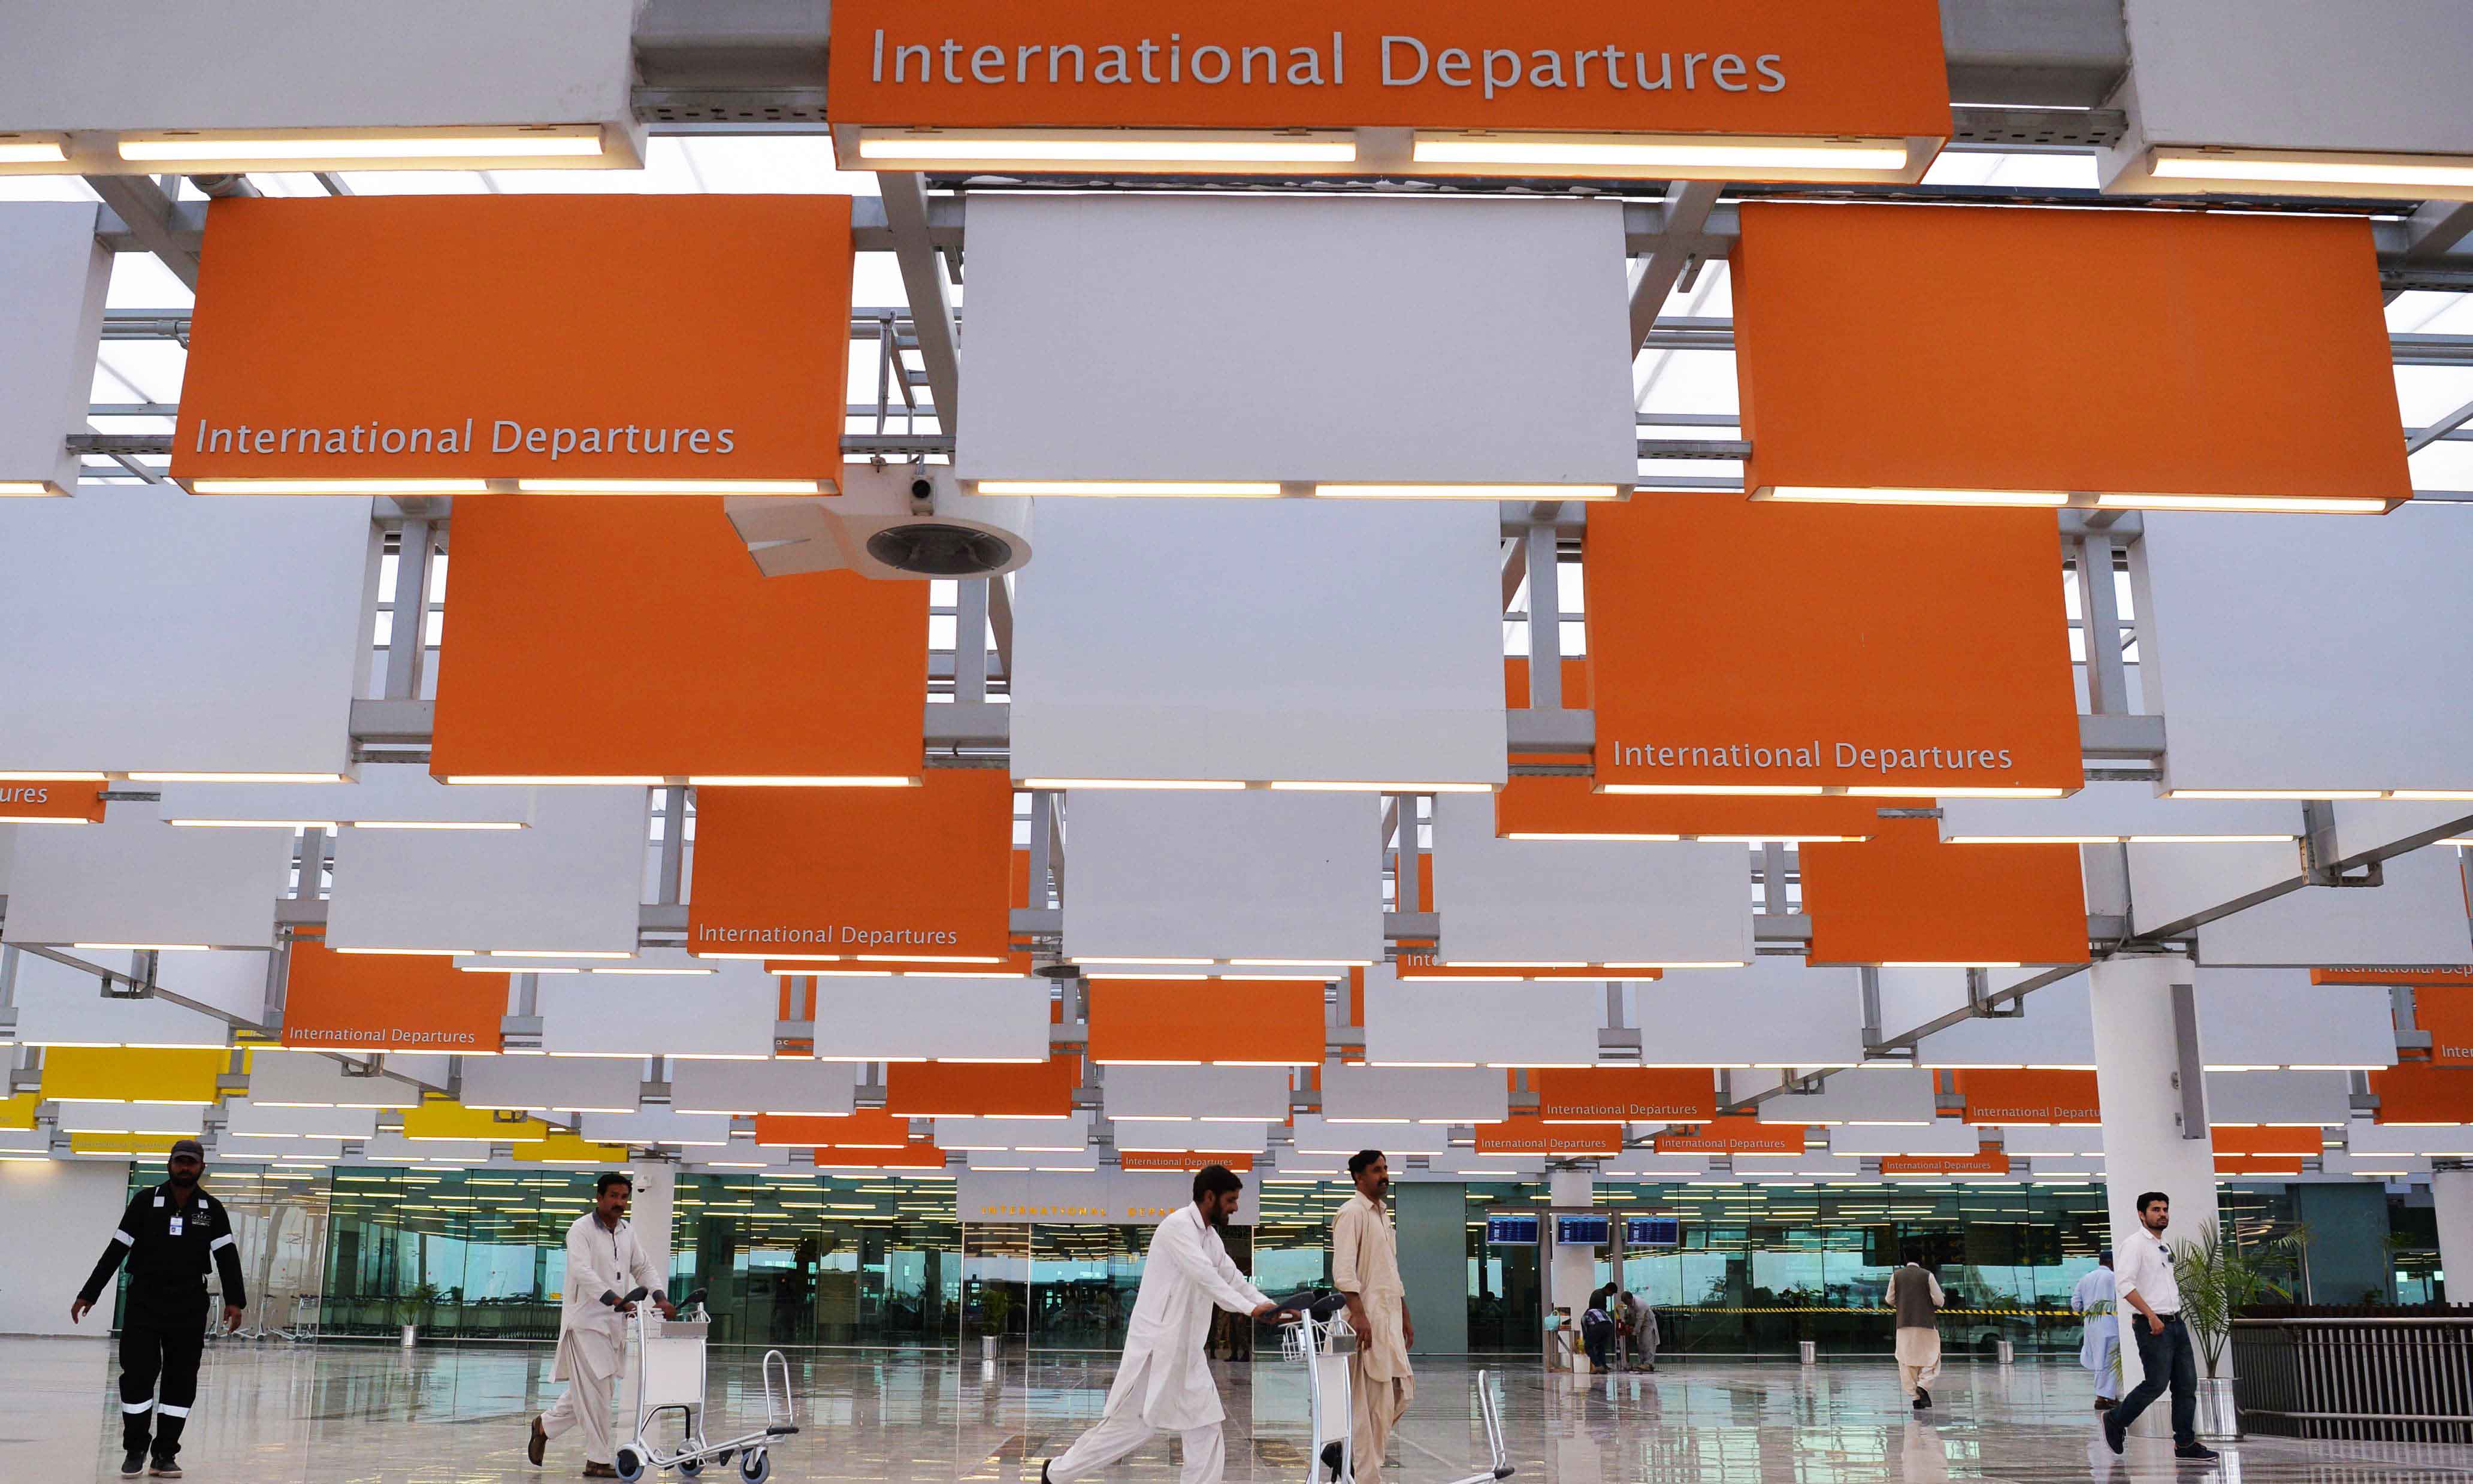 Islamabad International Airport - In pictures